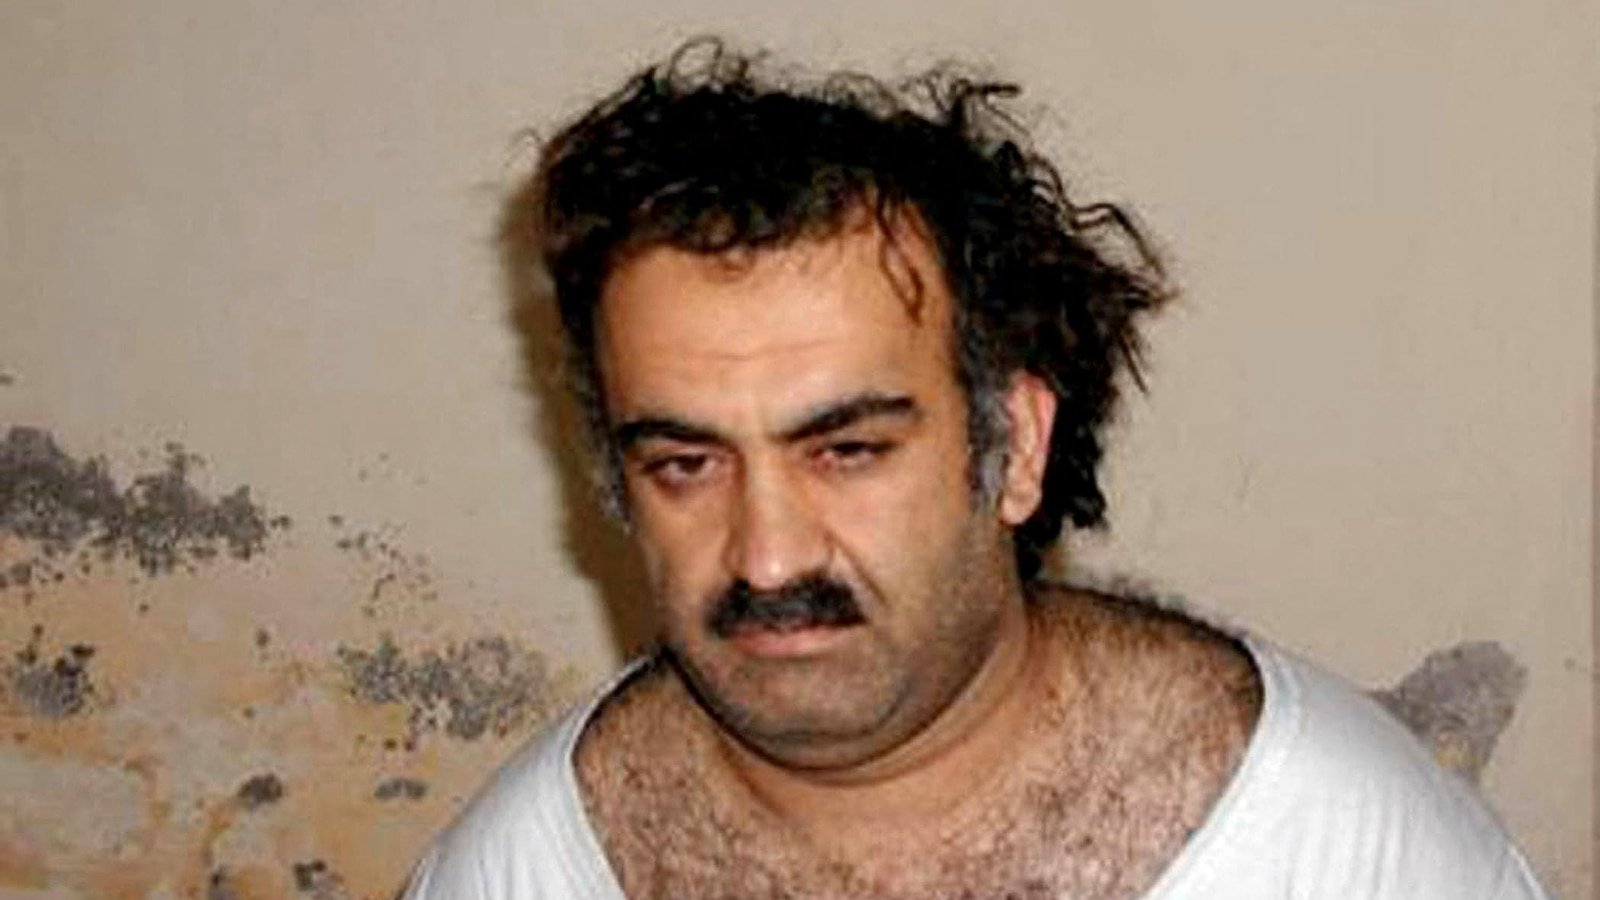 9/11 mastermind Khalid Sheikh Mohammed and 2 others reach plea deal